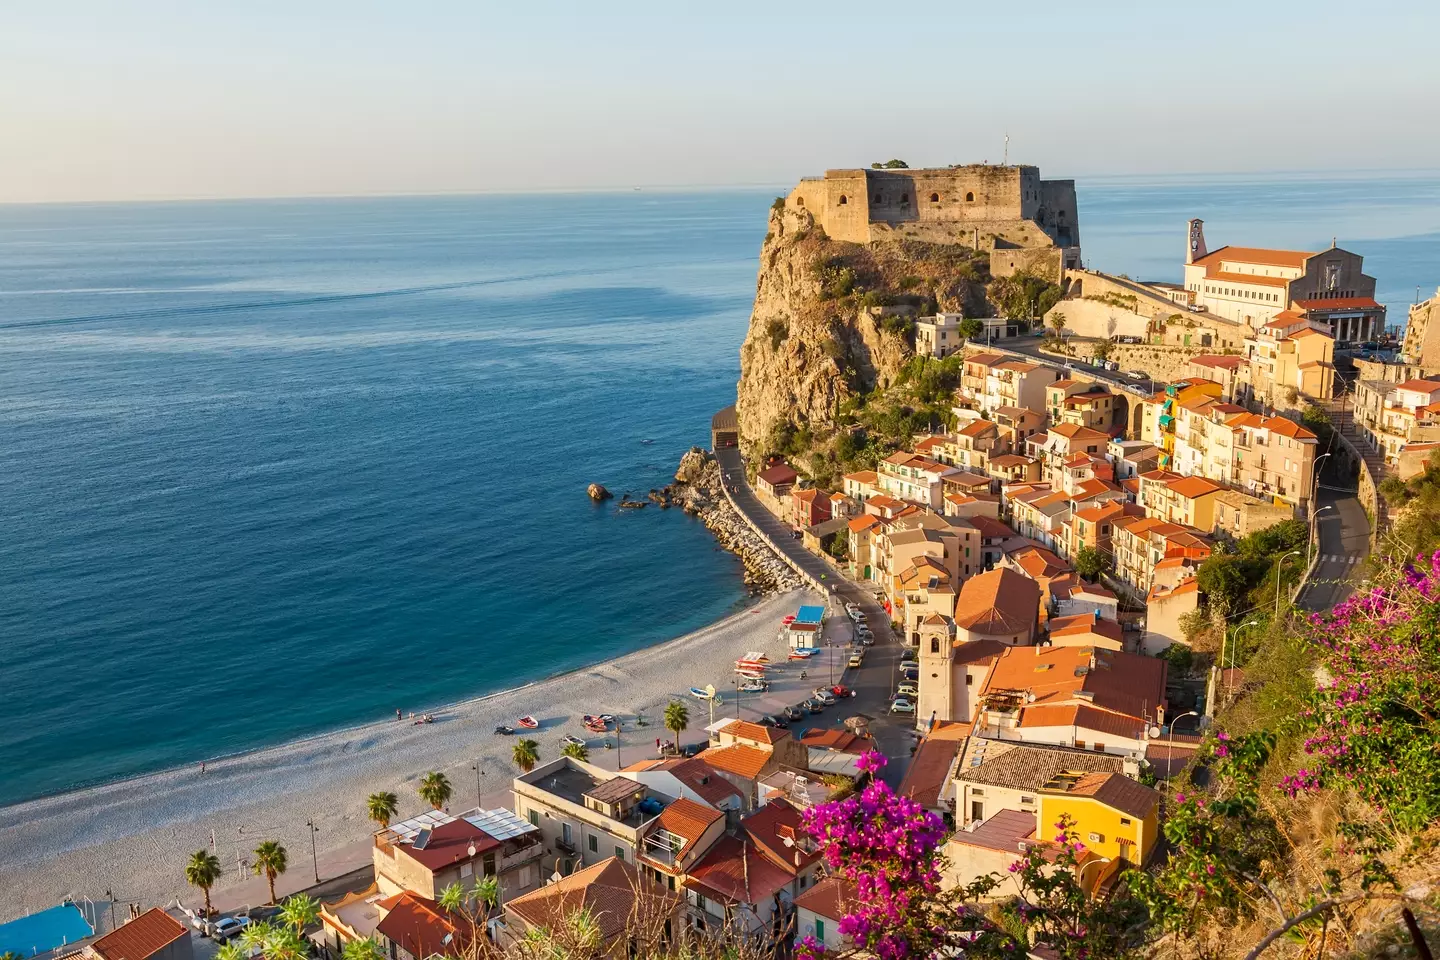 Under 40s could get paid handsomely to move to Calabria.